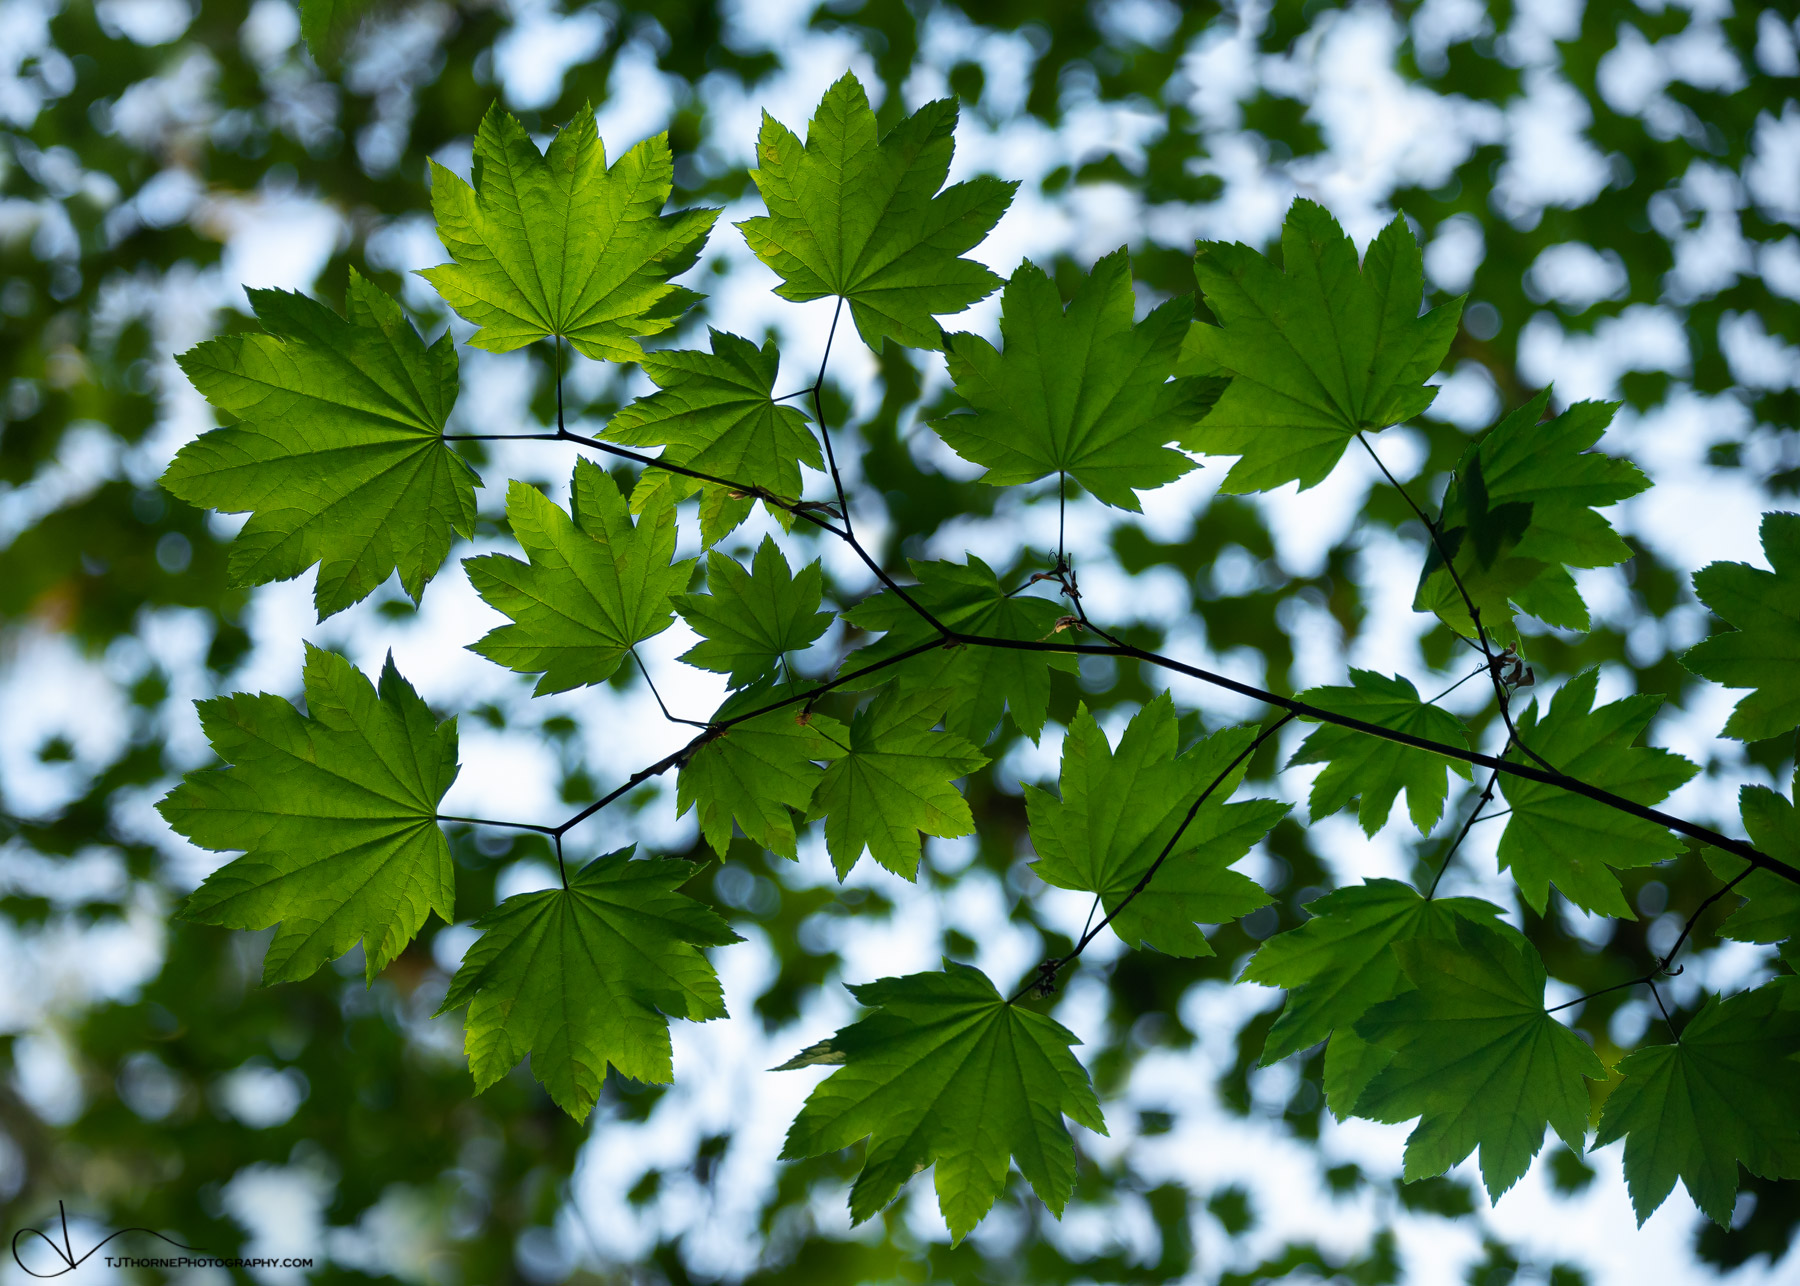 FINE ART LIMITED EDITION OF 100 Backlit leaves in Olympic National Park, Washington.